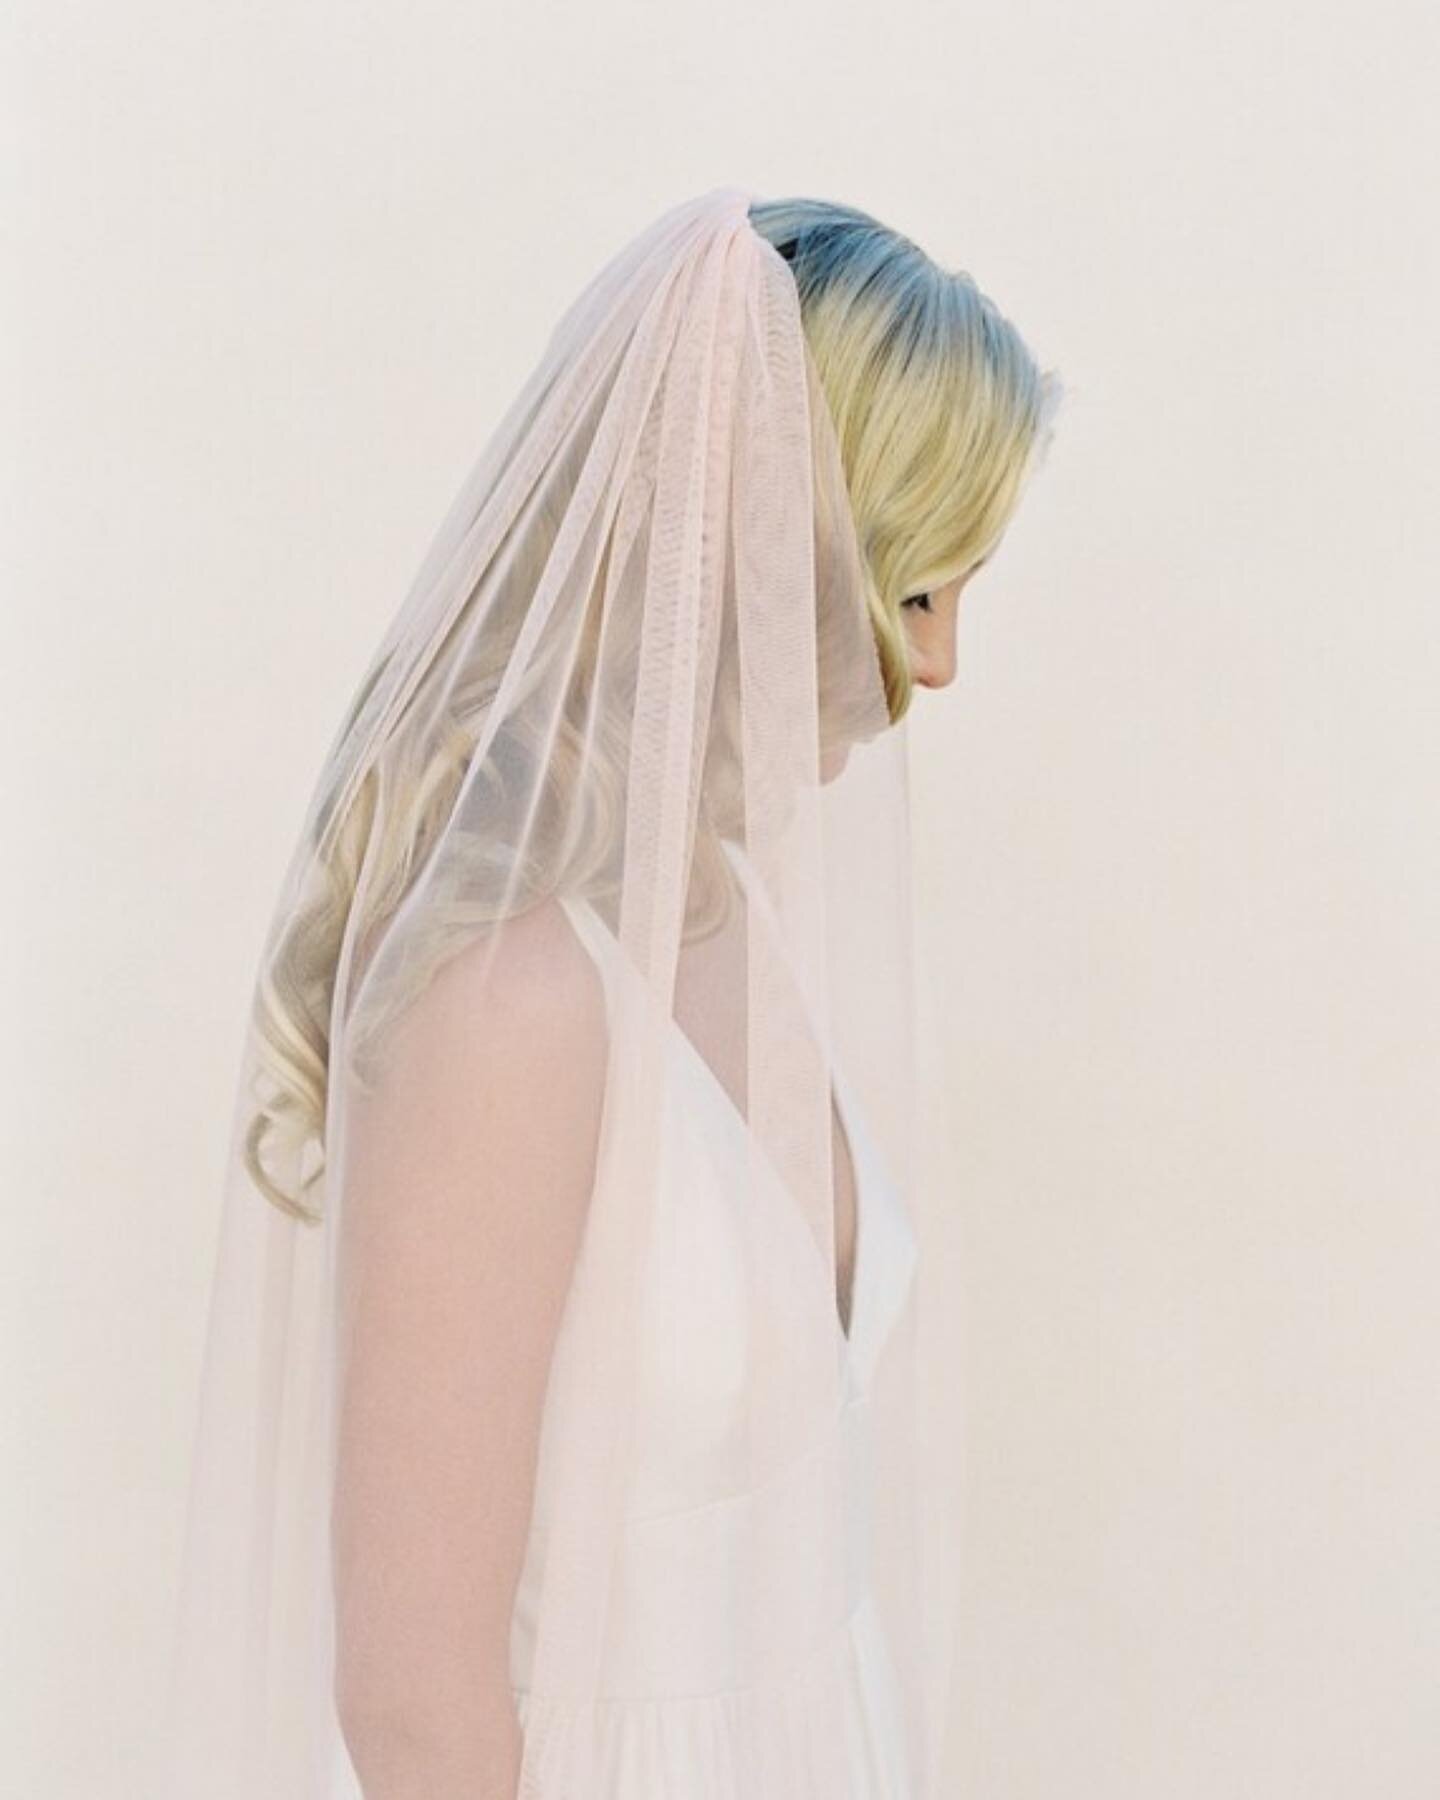 All simple veils 50% off all of February because we love you